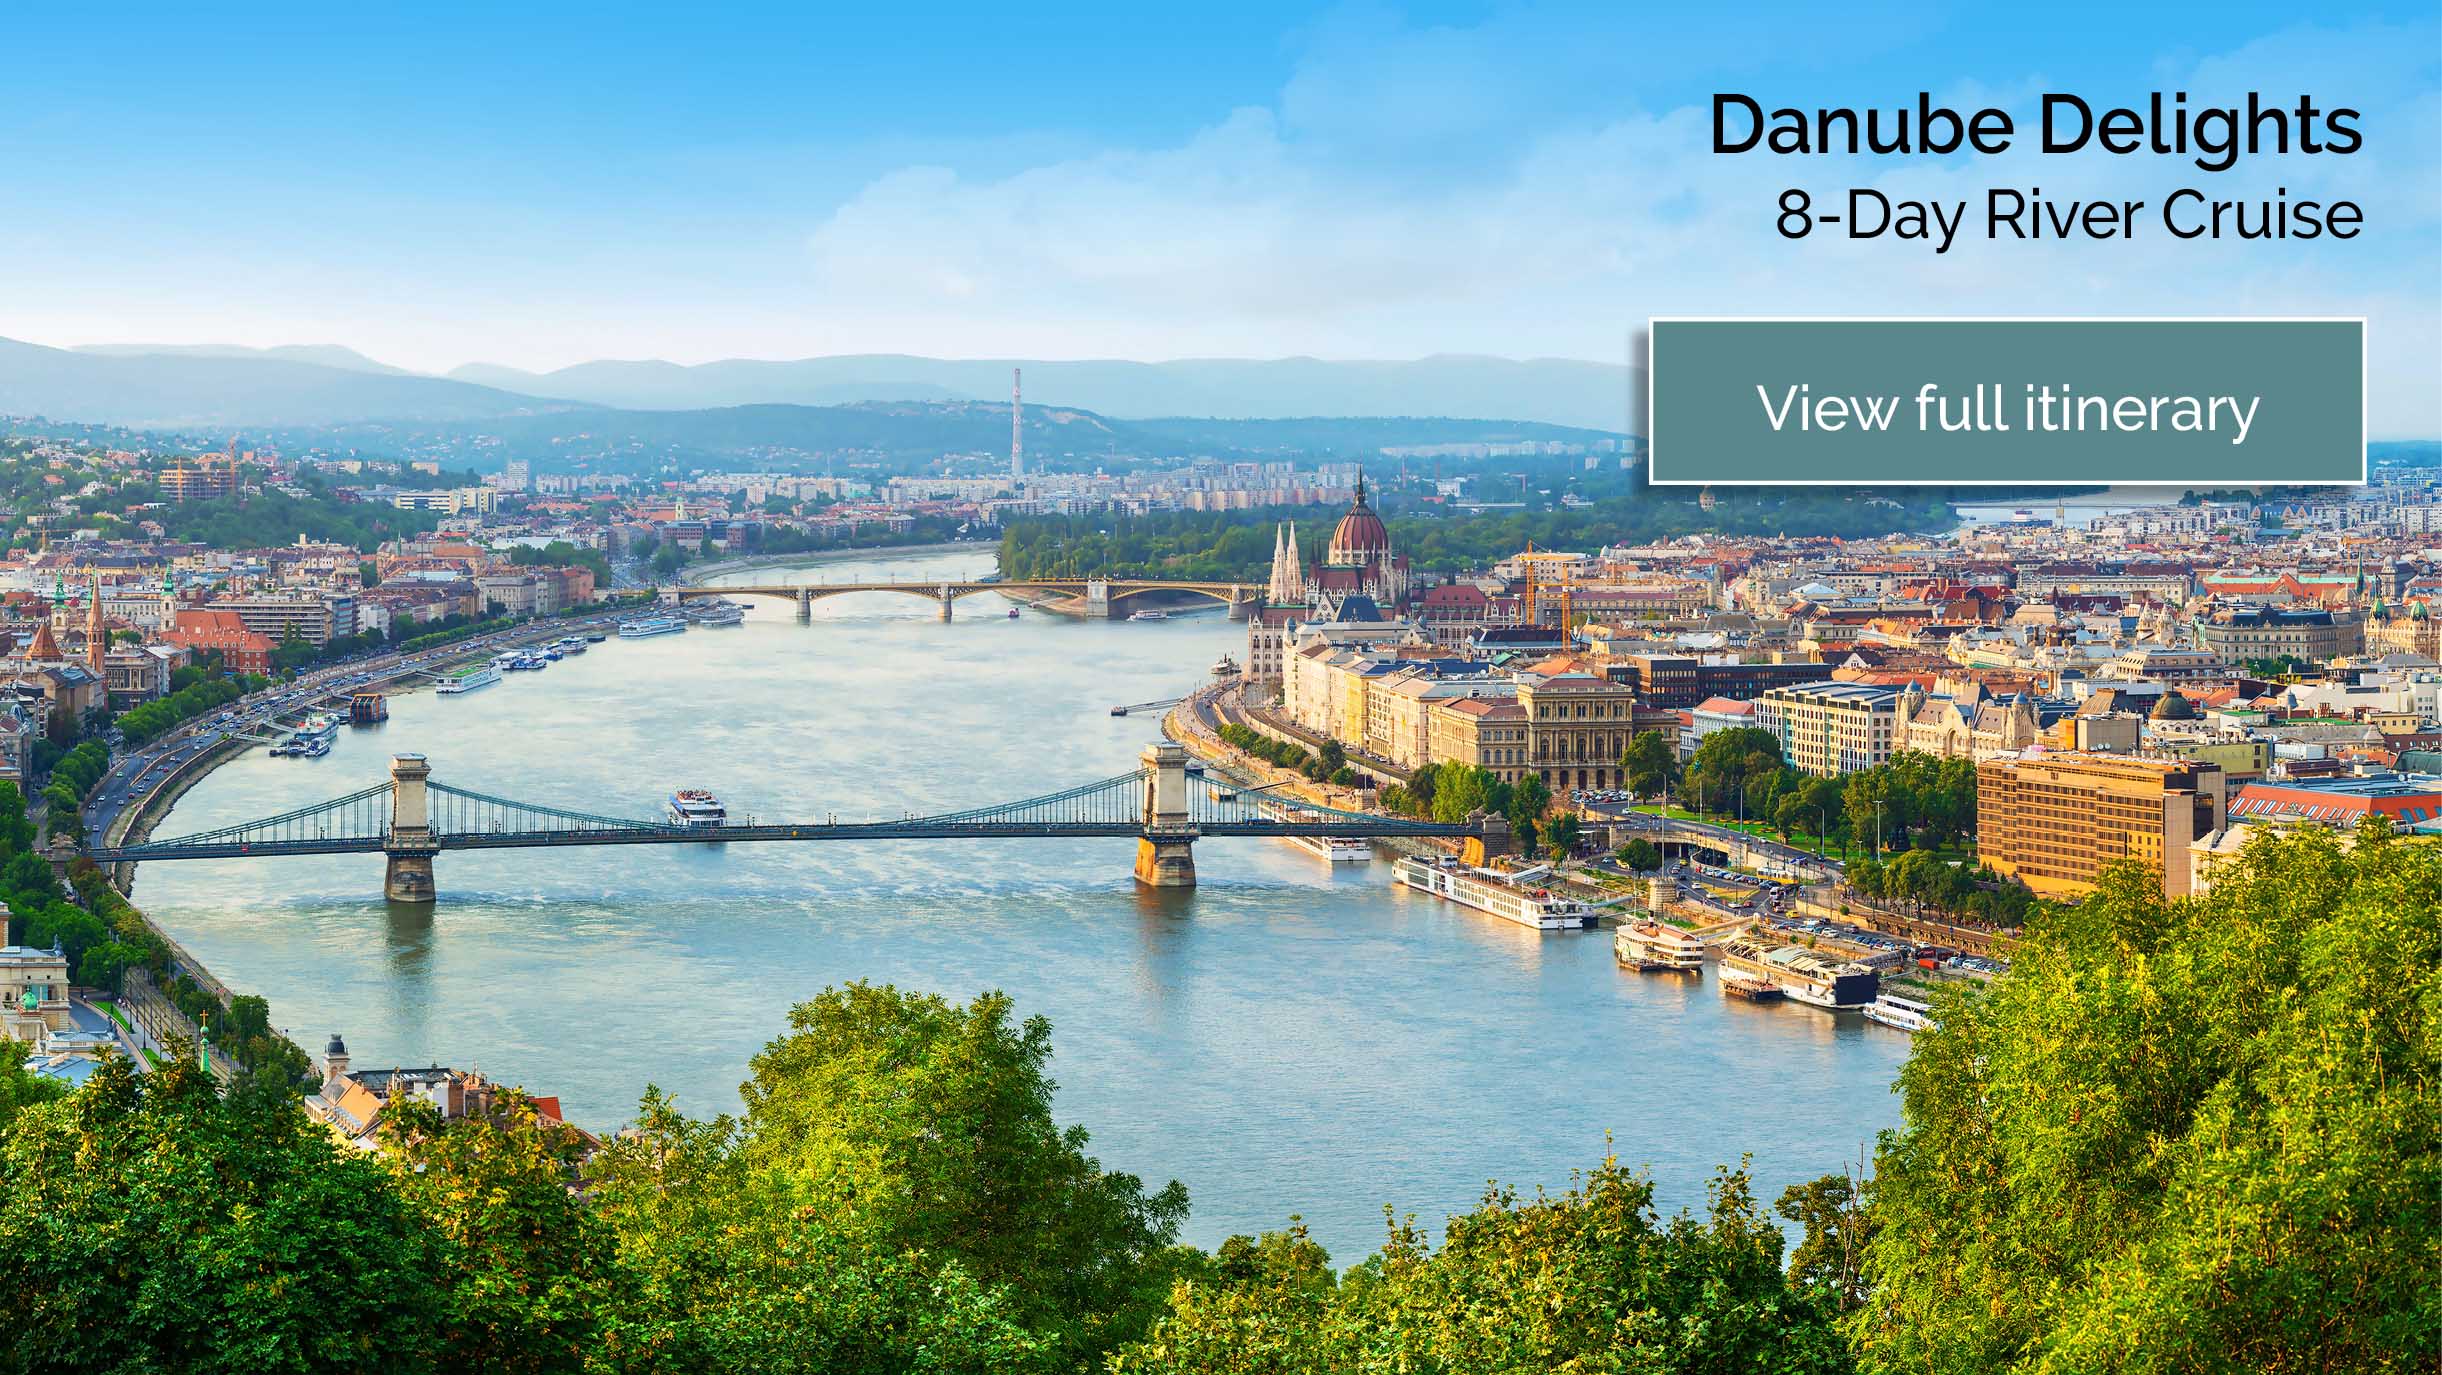 view the full Danube Delights 8-Day River Cruise itinerary here